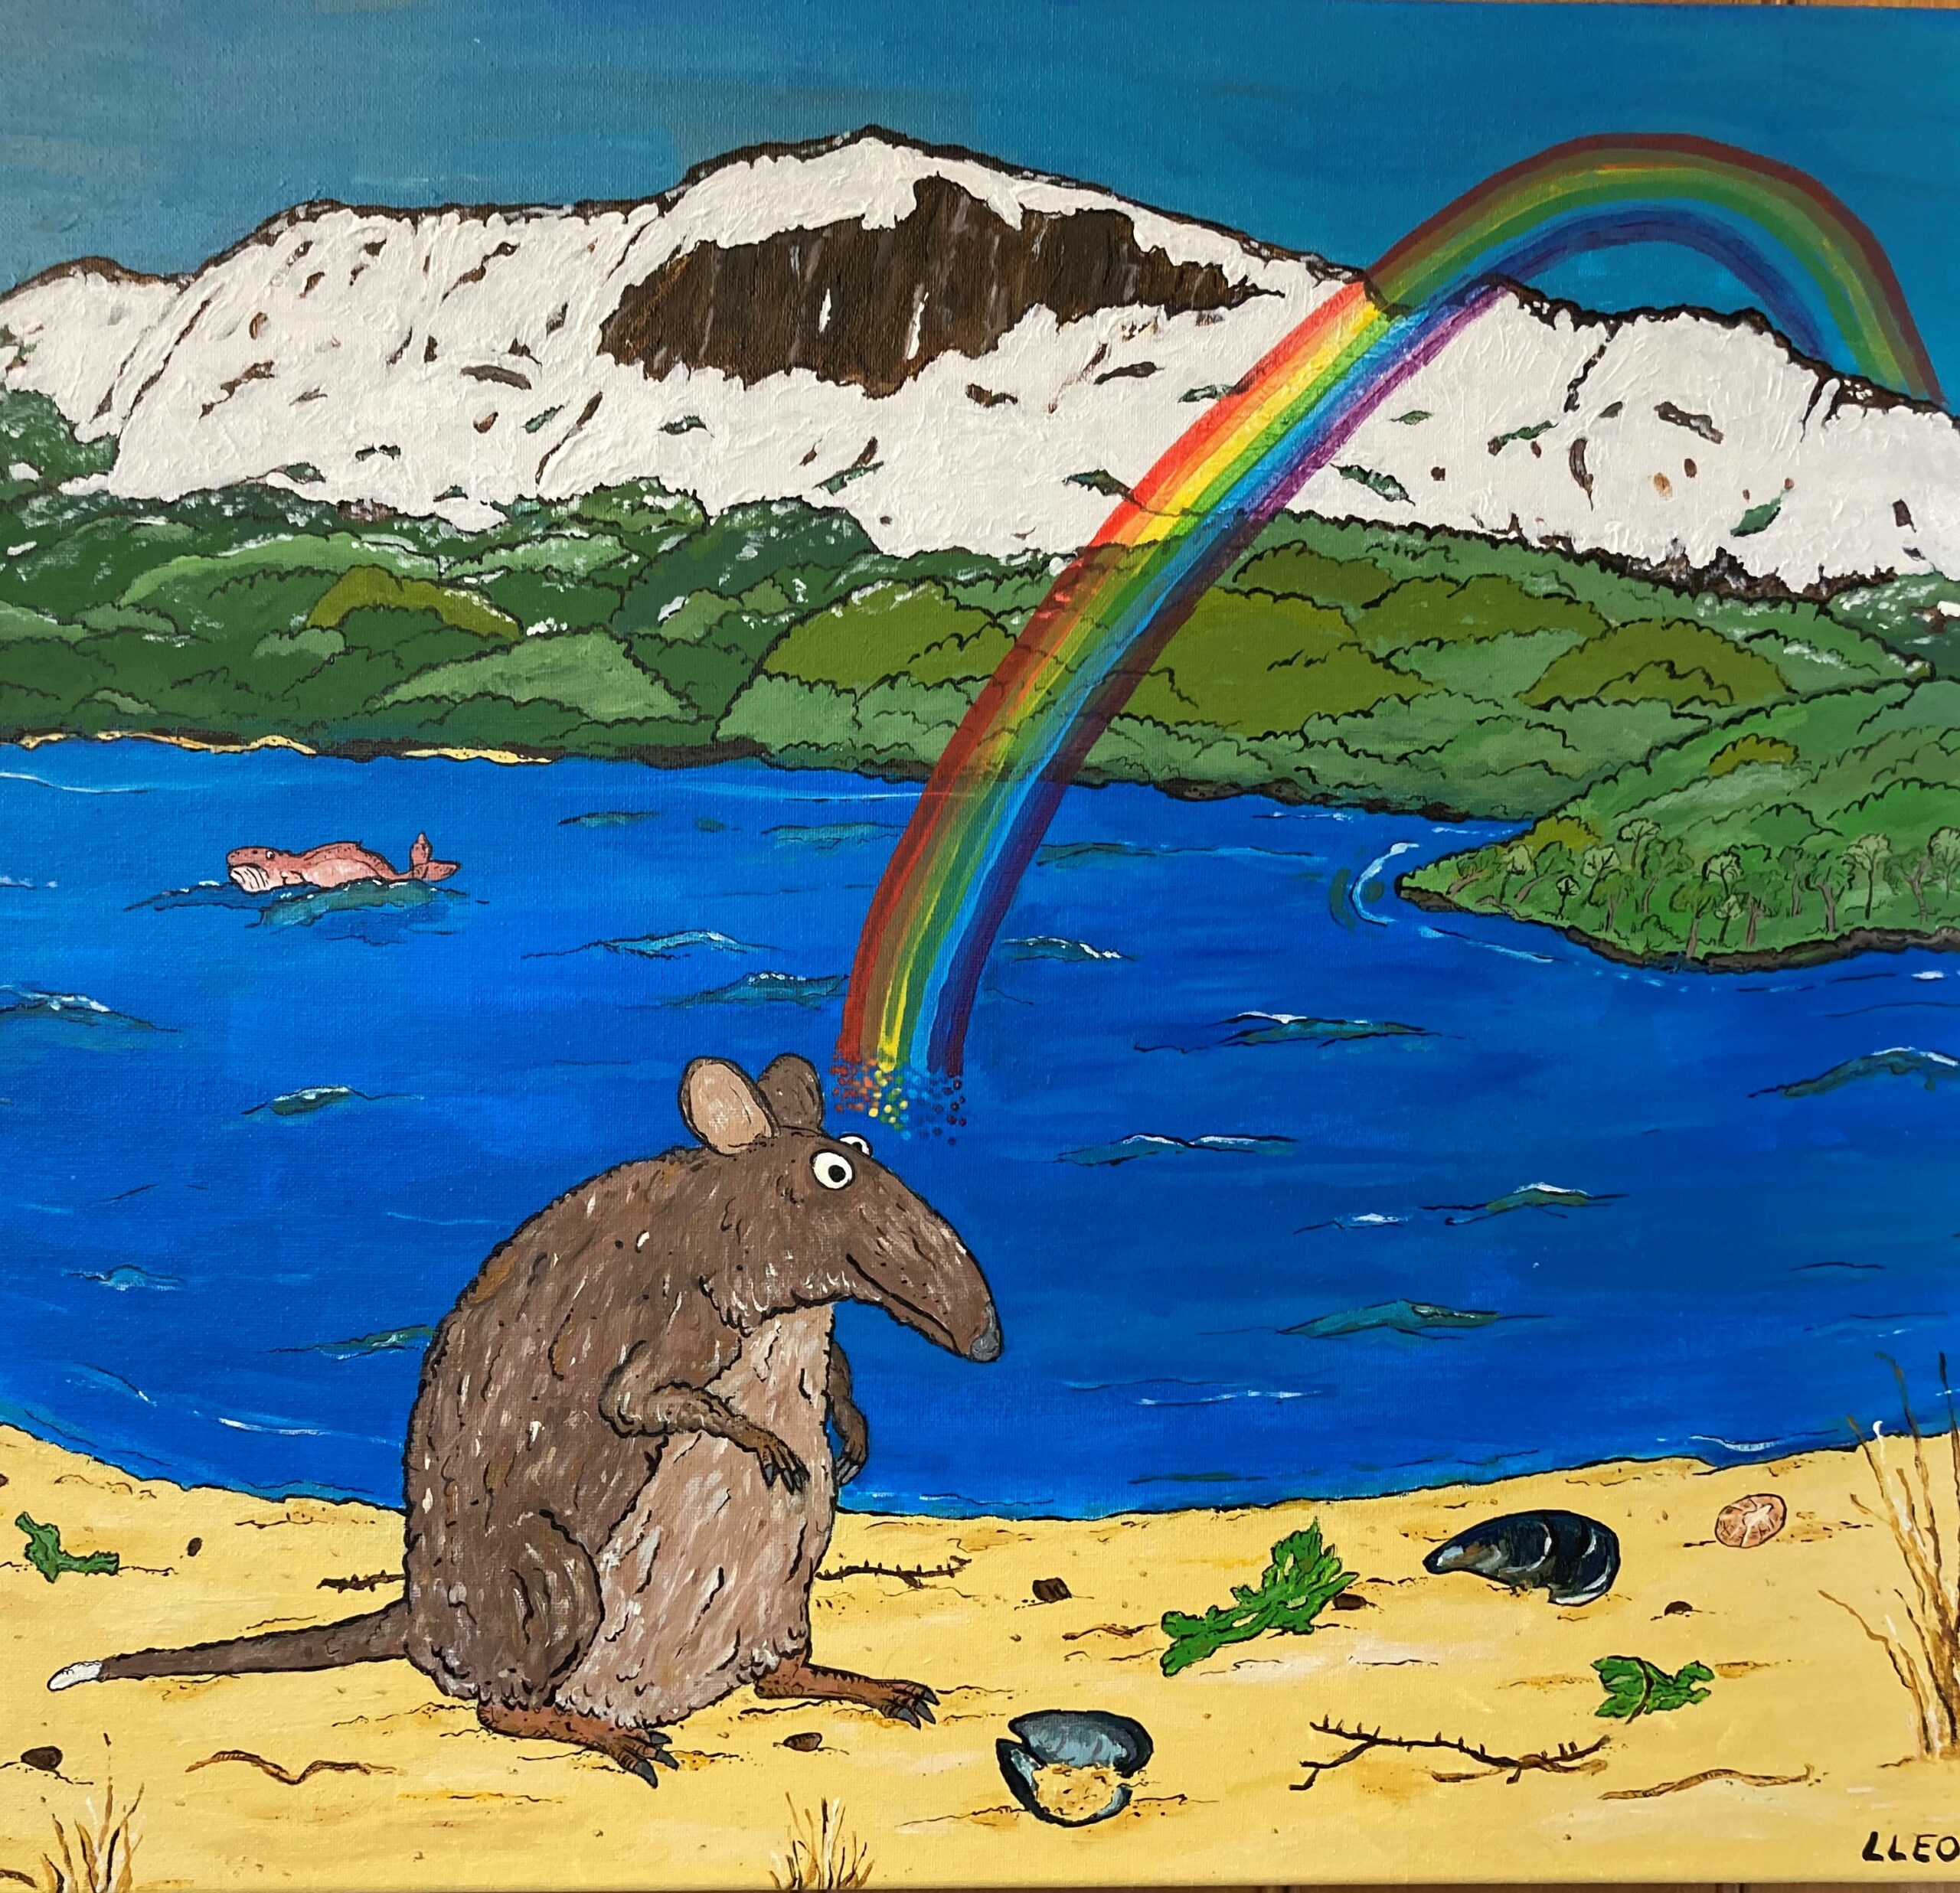 The Potoroo at the End of the Rainbow, Acrylic on canvas, 24 by 20 inches. 2023